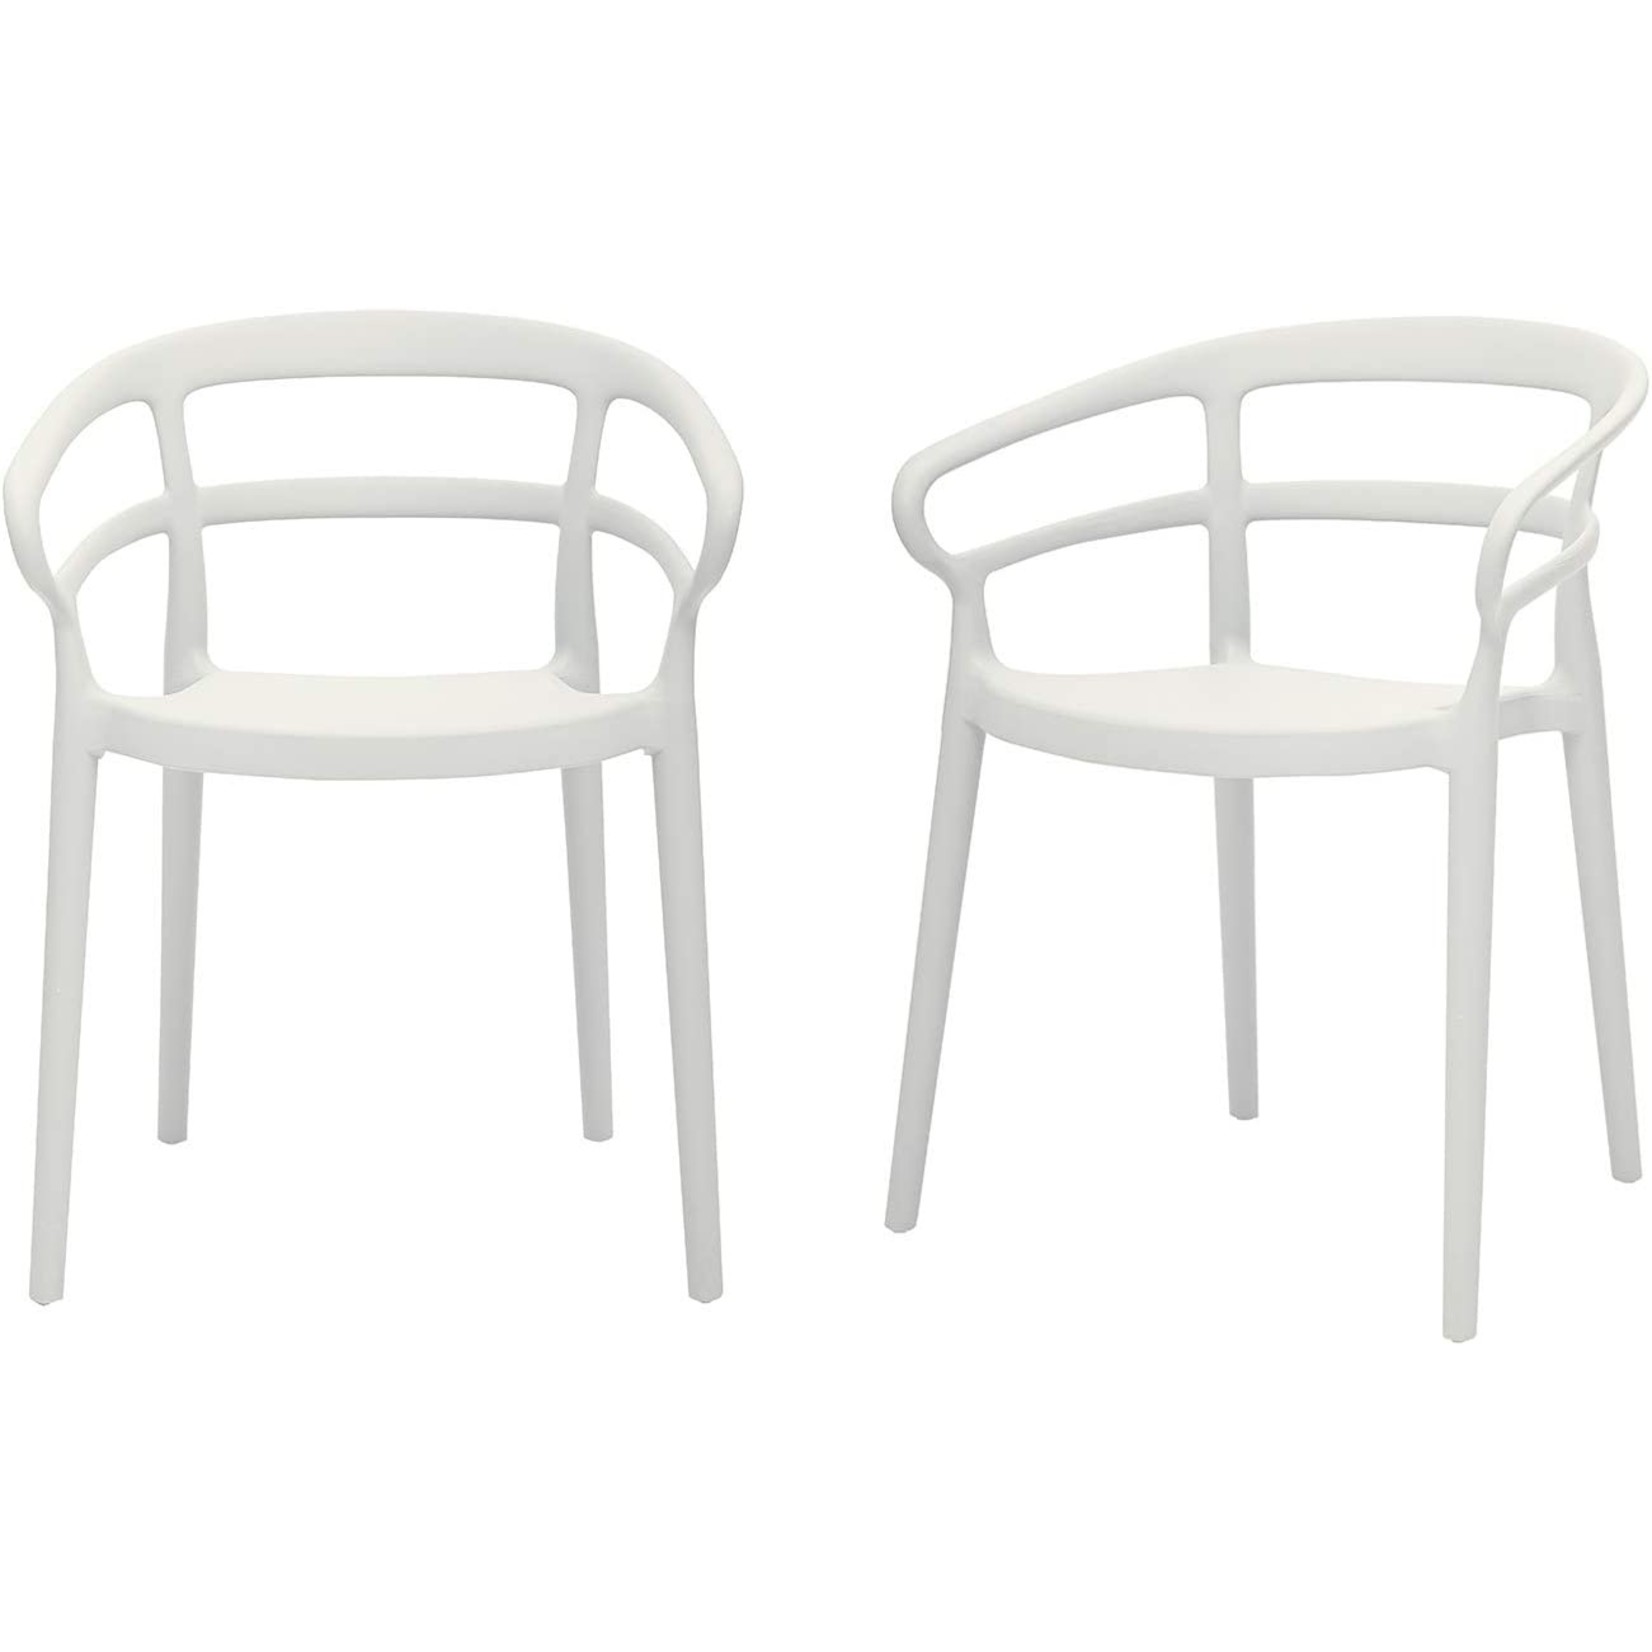 Nova SET of 2 - White, Curved Back Dining Chairs